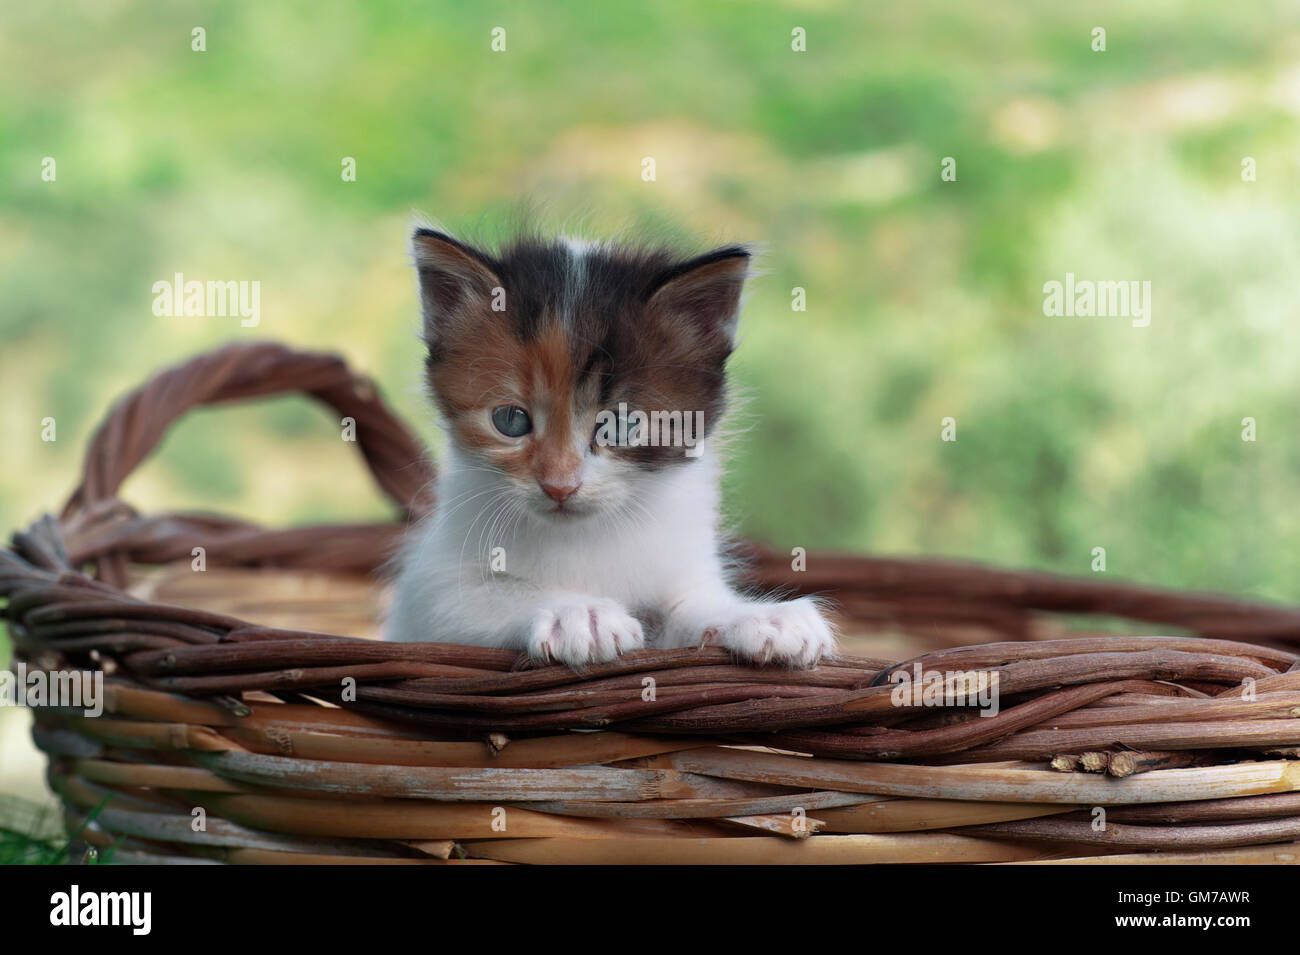 Kitten standing in a basket outdoors Stock Photo